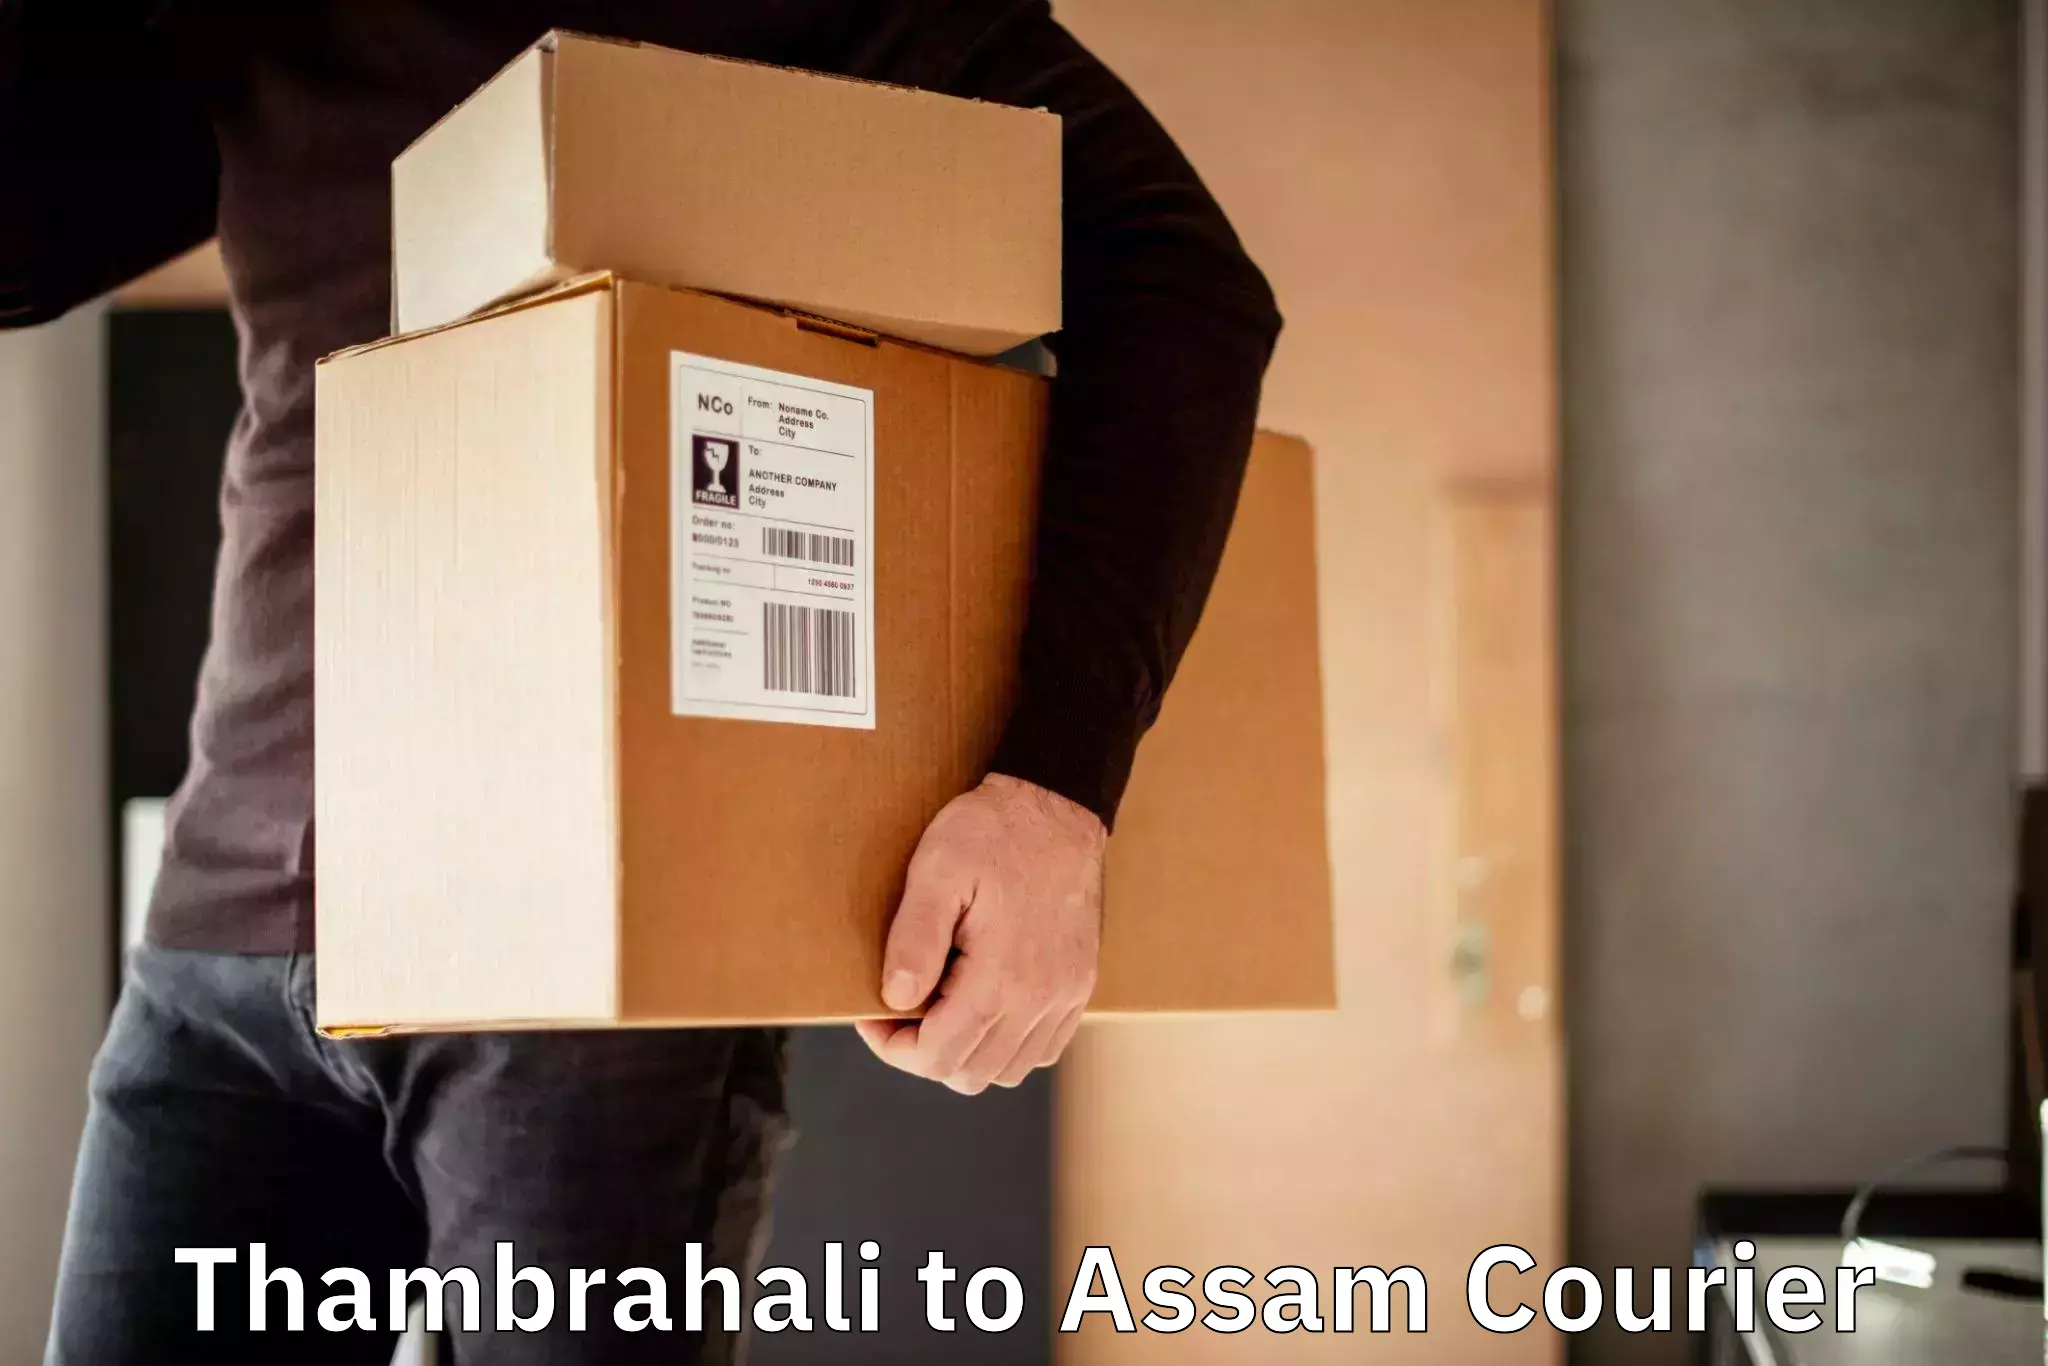 Next-day delivery options Thambrahali to Assam